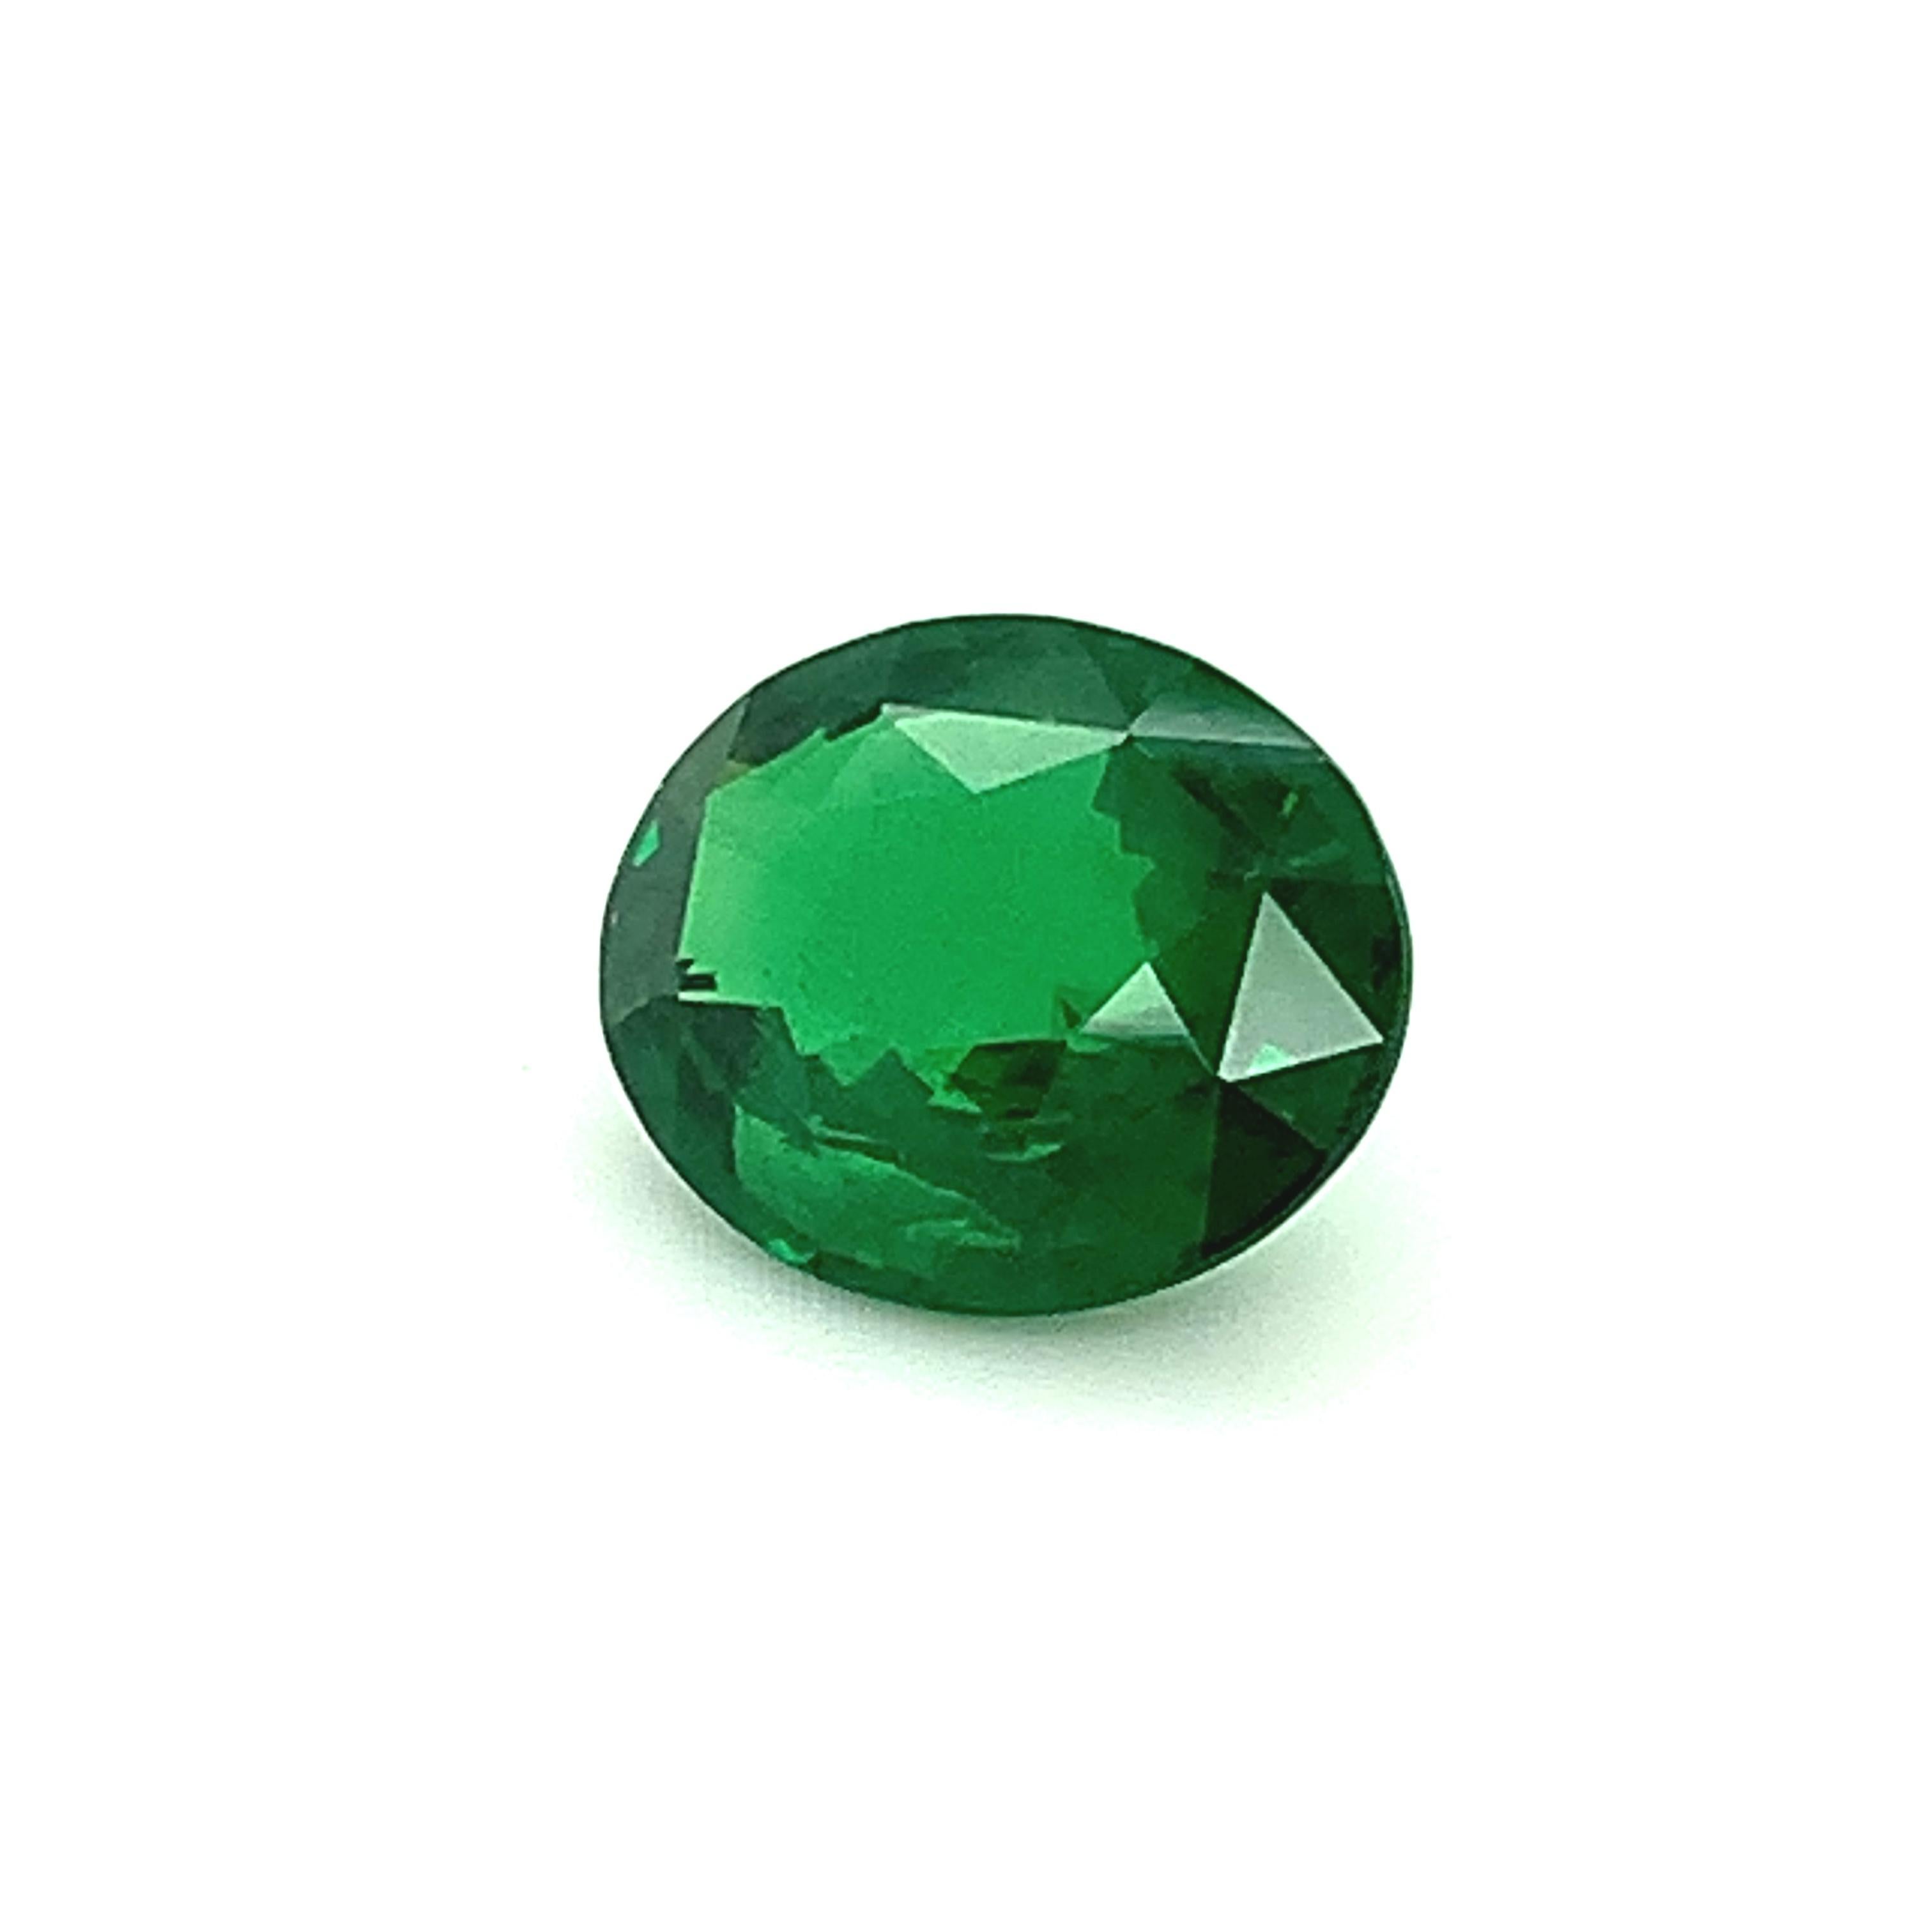 5.03 Carat Tsavorite Garnet Oval, Unset Loose Gemstone, GIA Certified ....A In New Condition For Sale In Los Angeles, CA